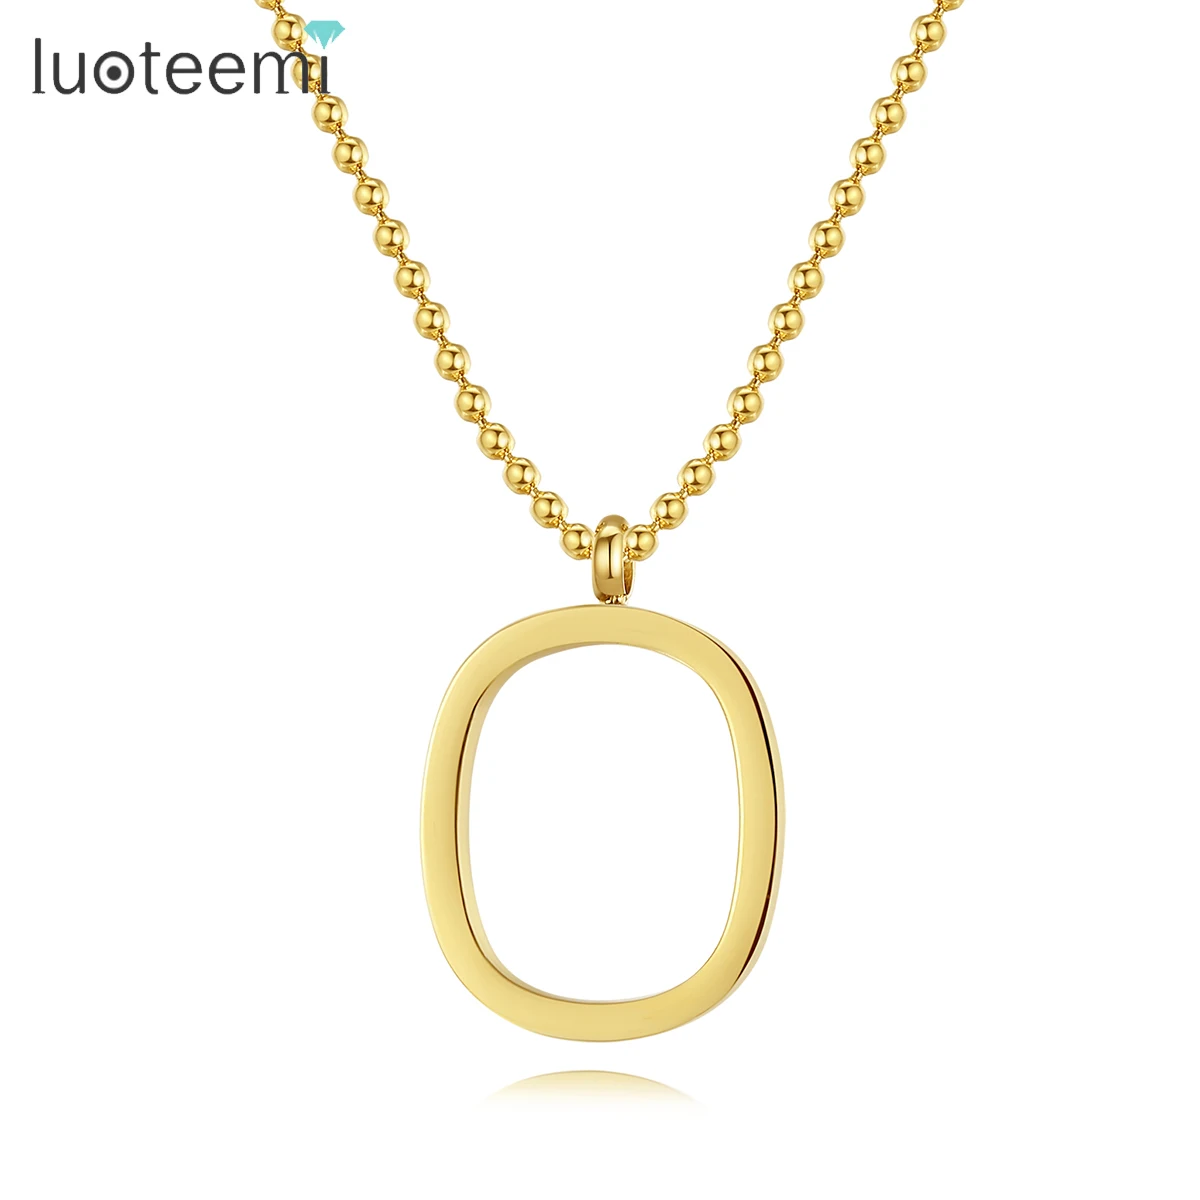 

SP-LAM Designer Statement Simple Pendant Chain Gold Plated Stainless Steel Charm Dainty Necklace Woman